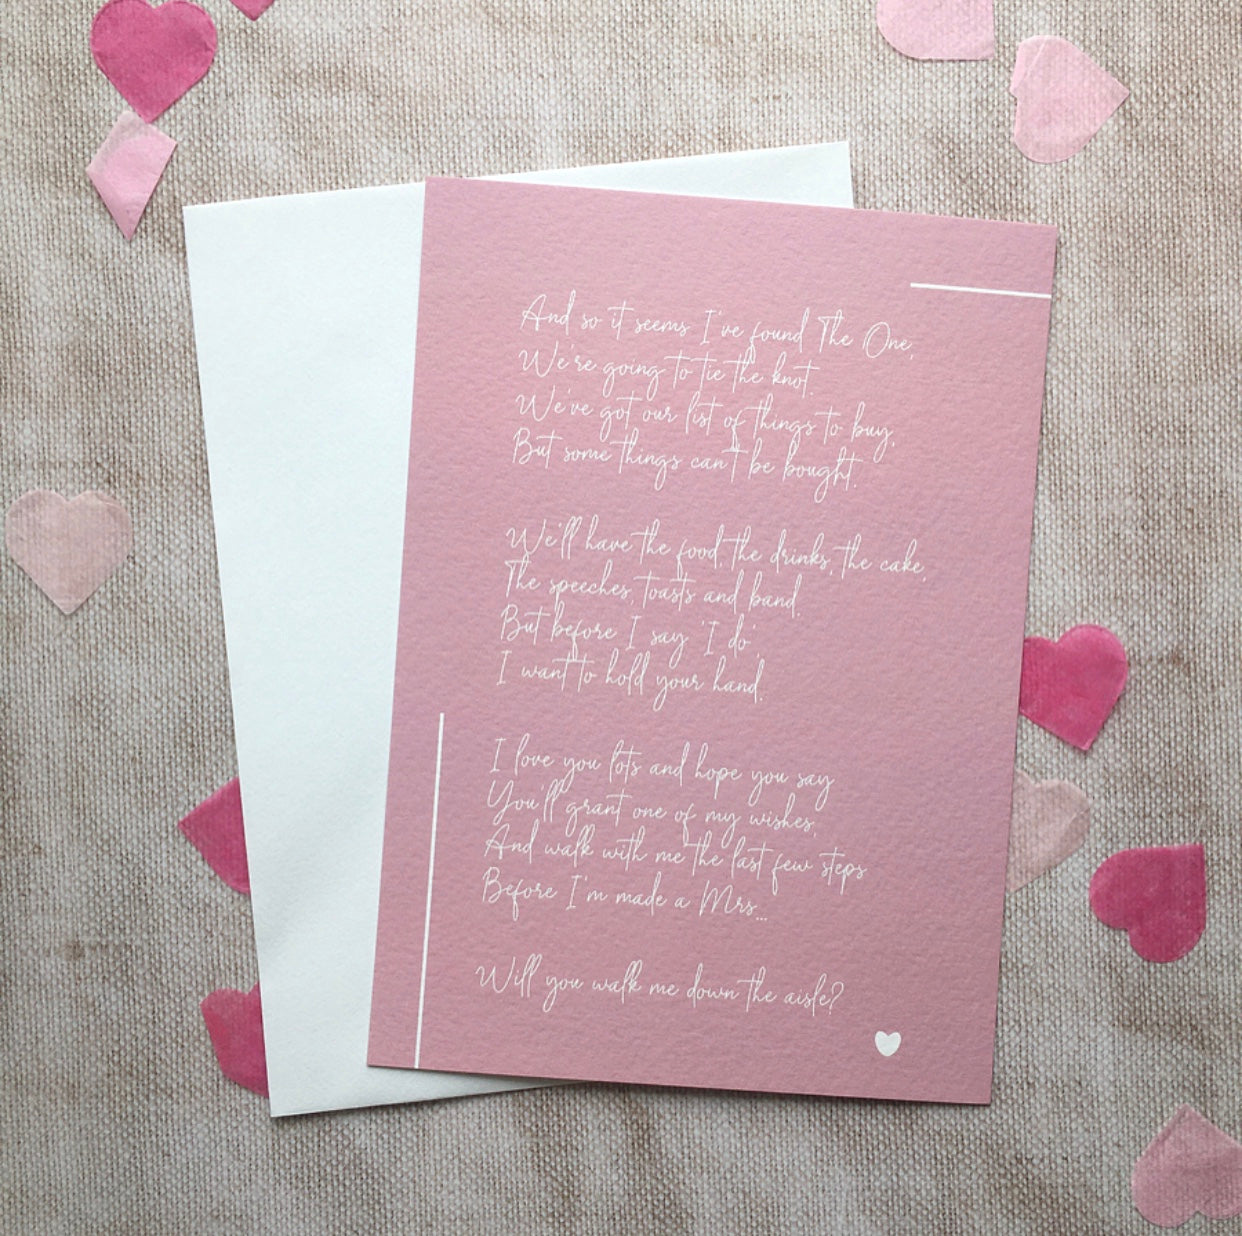 'Will you walk me down the aisle?' Poem Print in Dusky Pink